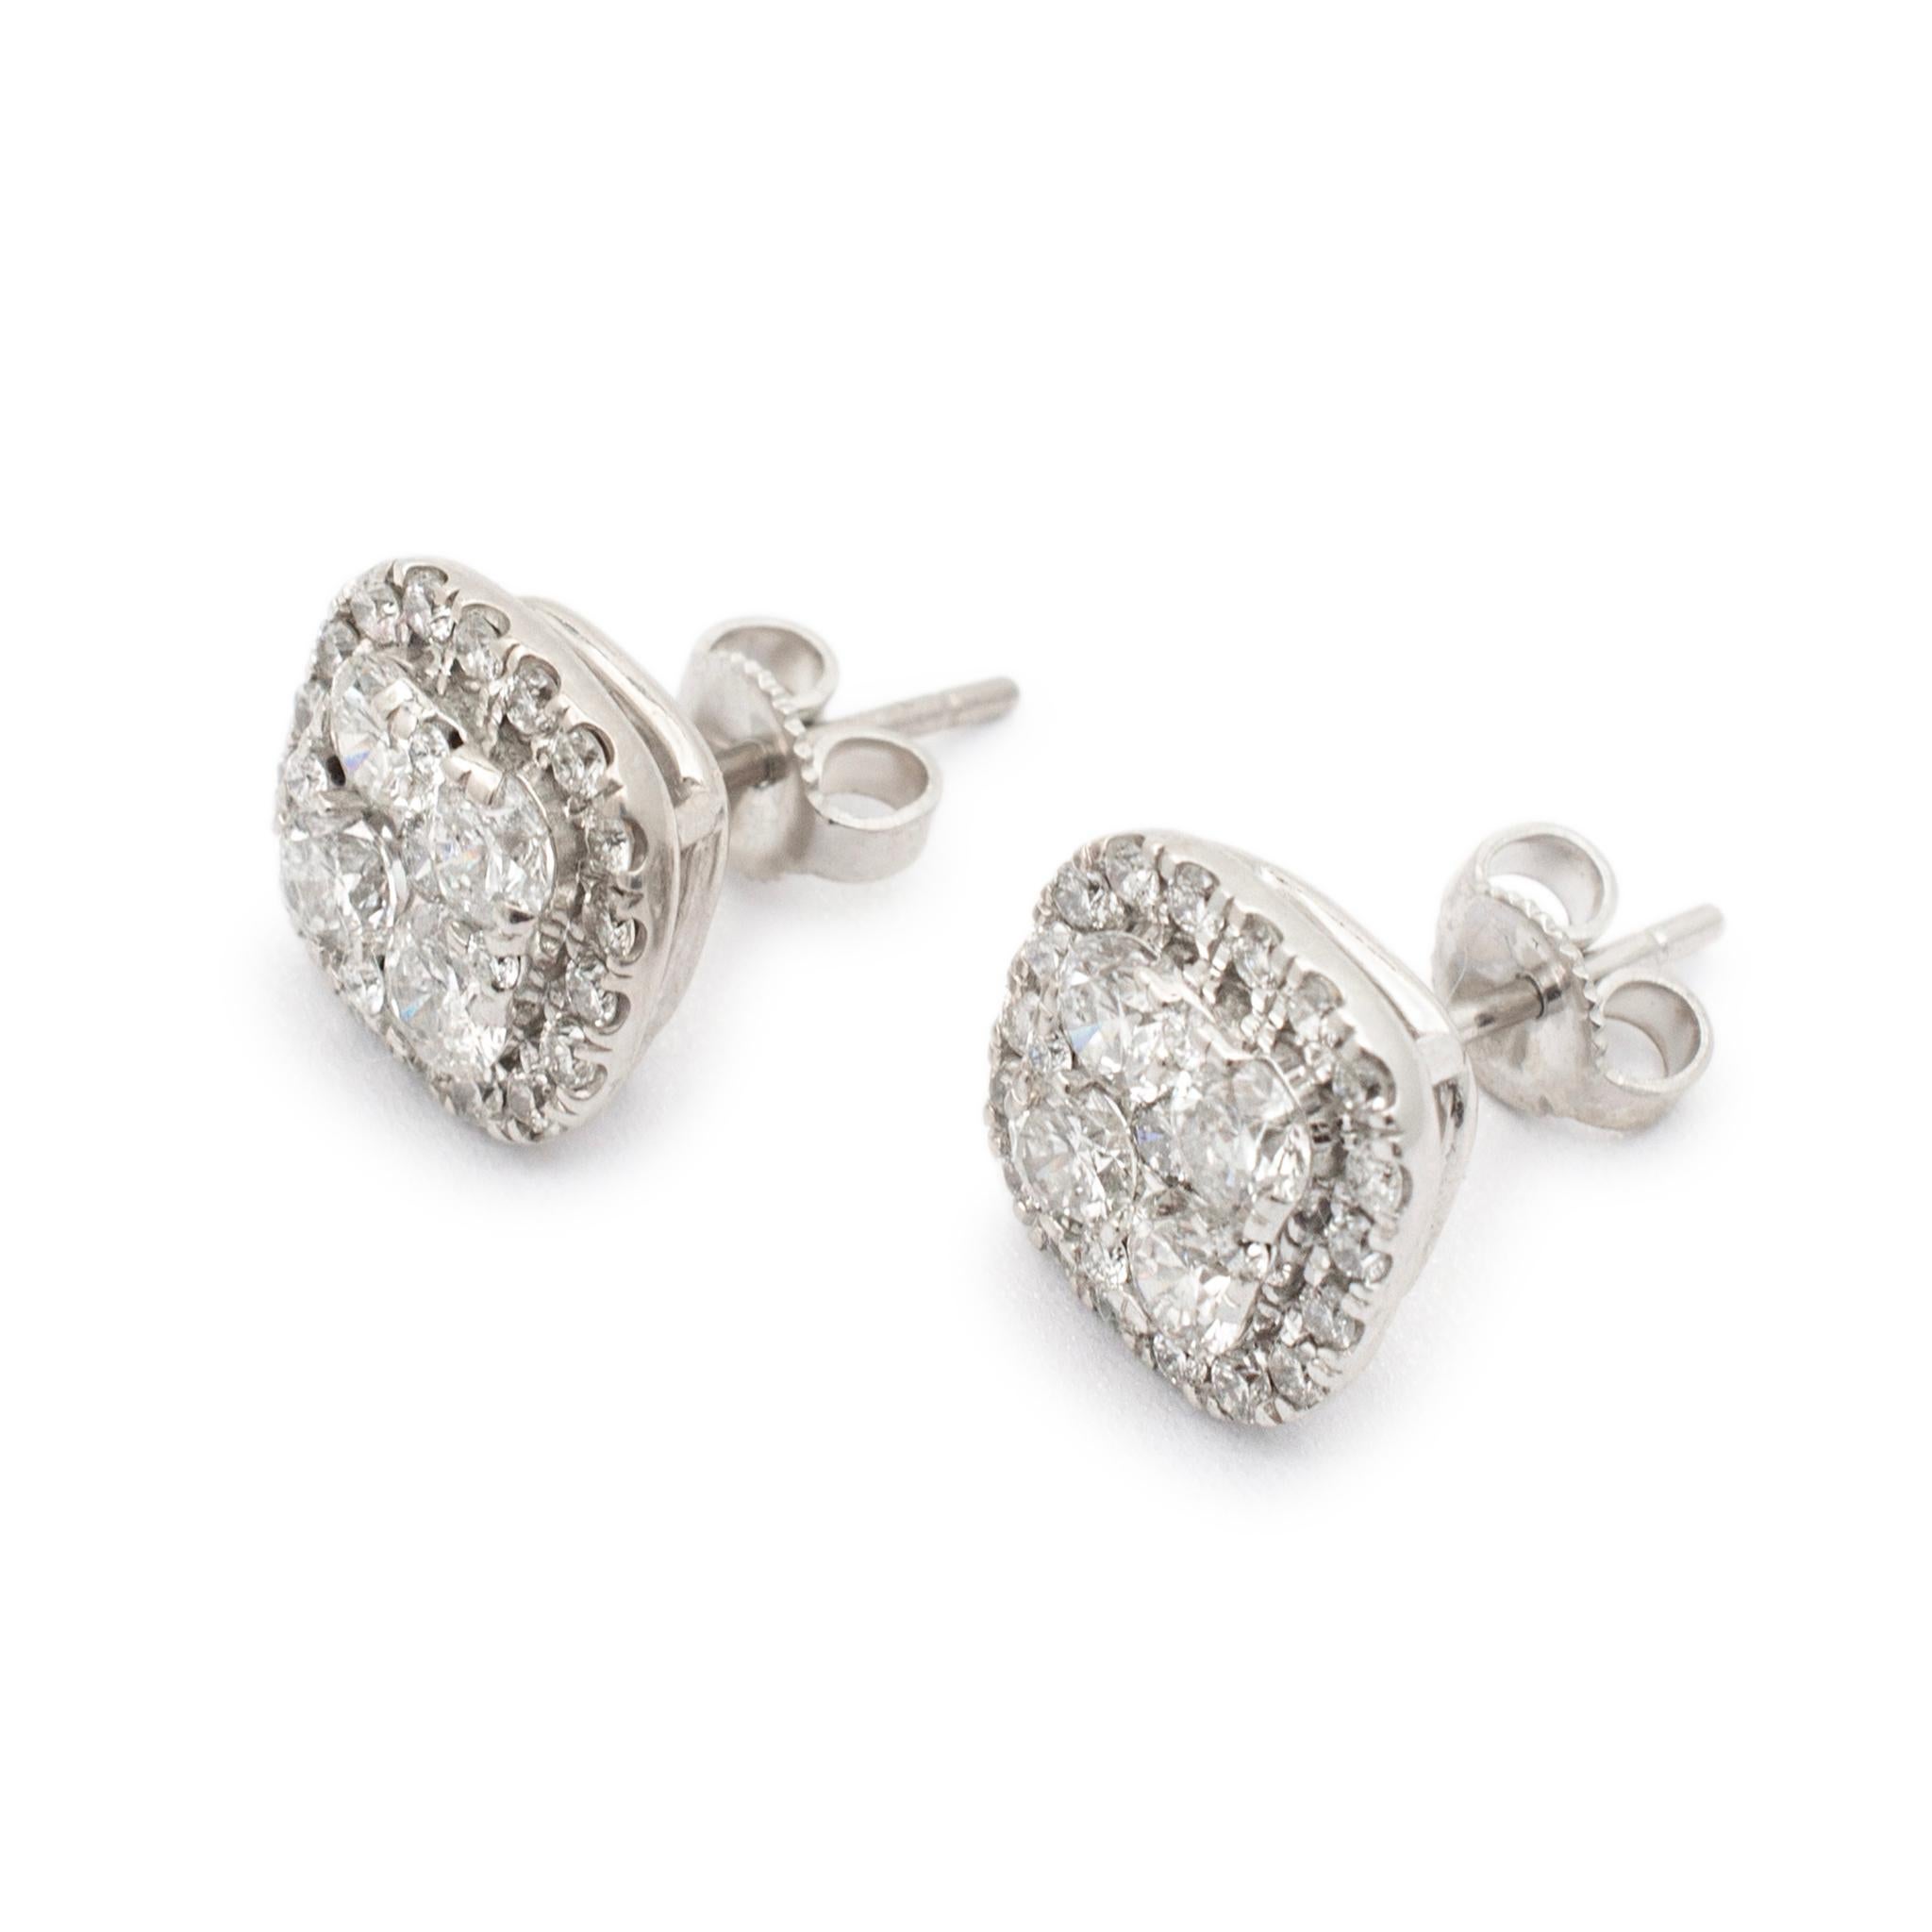 Gender: Ladies

Metal Type: 14K White Gold

Length: 0.63 Inches

Width: 11.10 mm

Weight: 4.90 grams

Ladies 14K white gold diamond stud earrings with push backs. Engraved with 